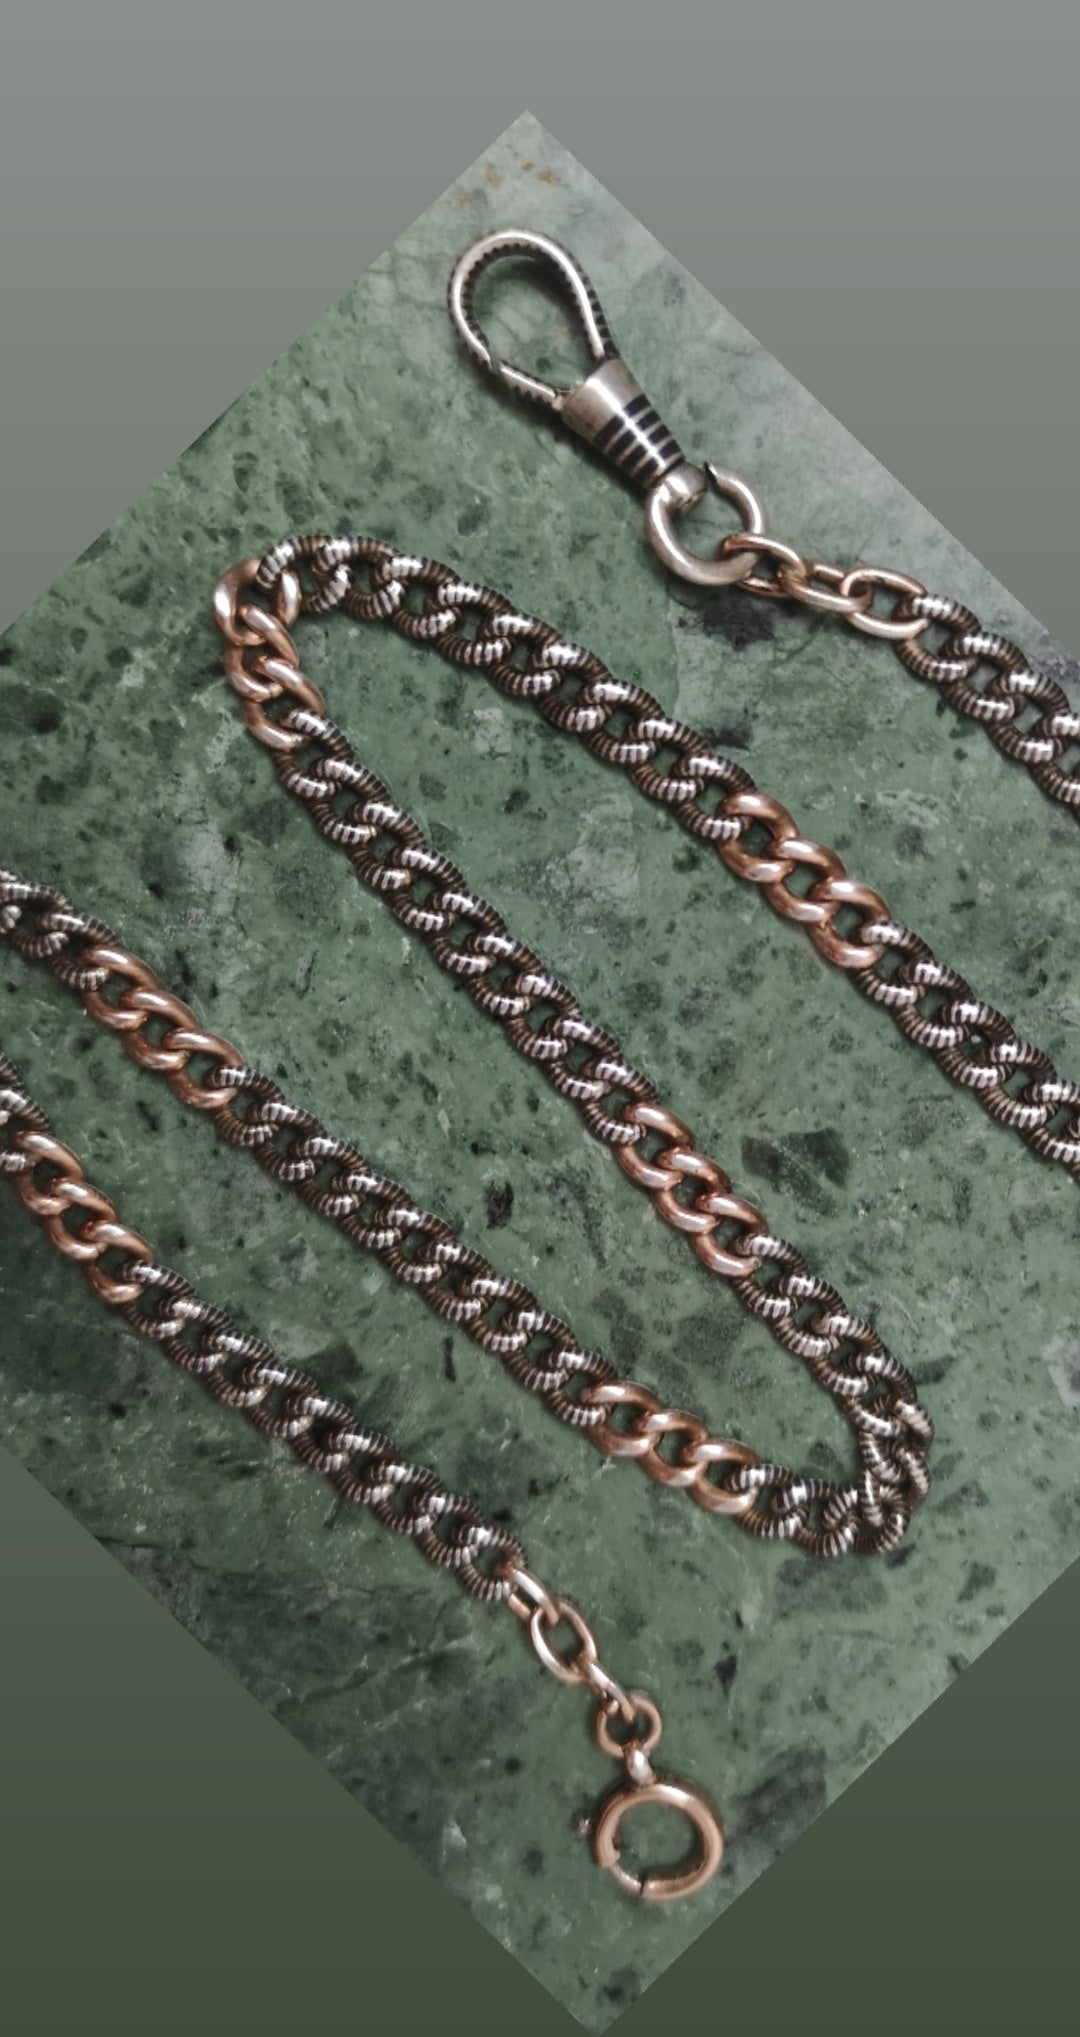 The niello watch chain with rose gold details